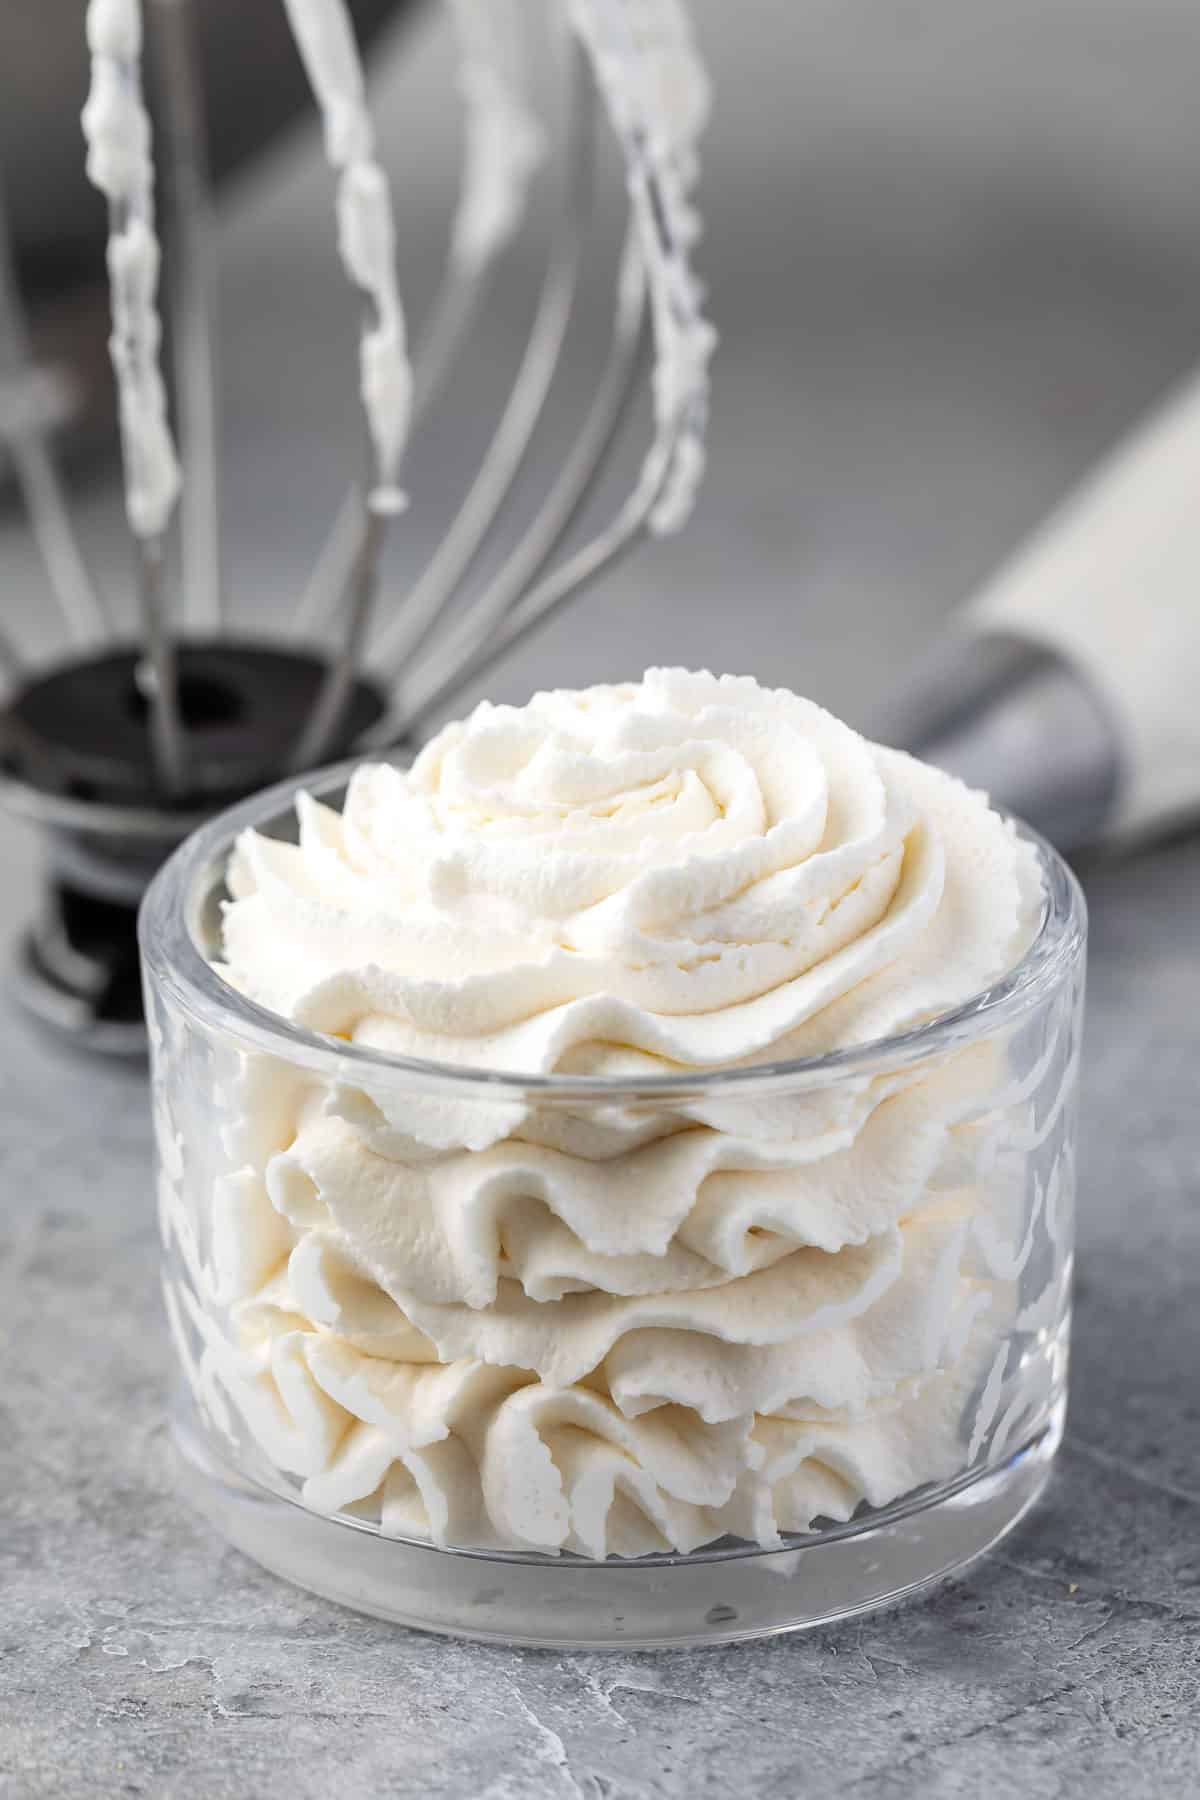 How to get PERFECT BLACK WHIPPING CREAM.Secret tip to get instant